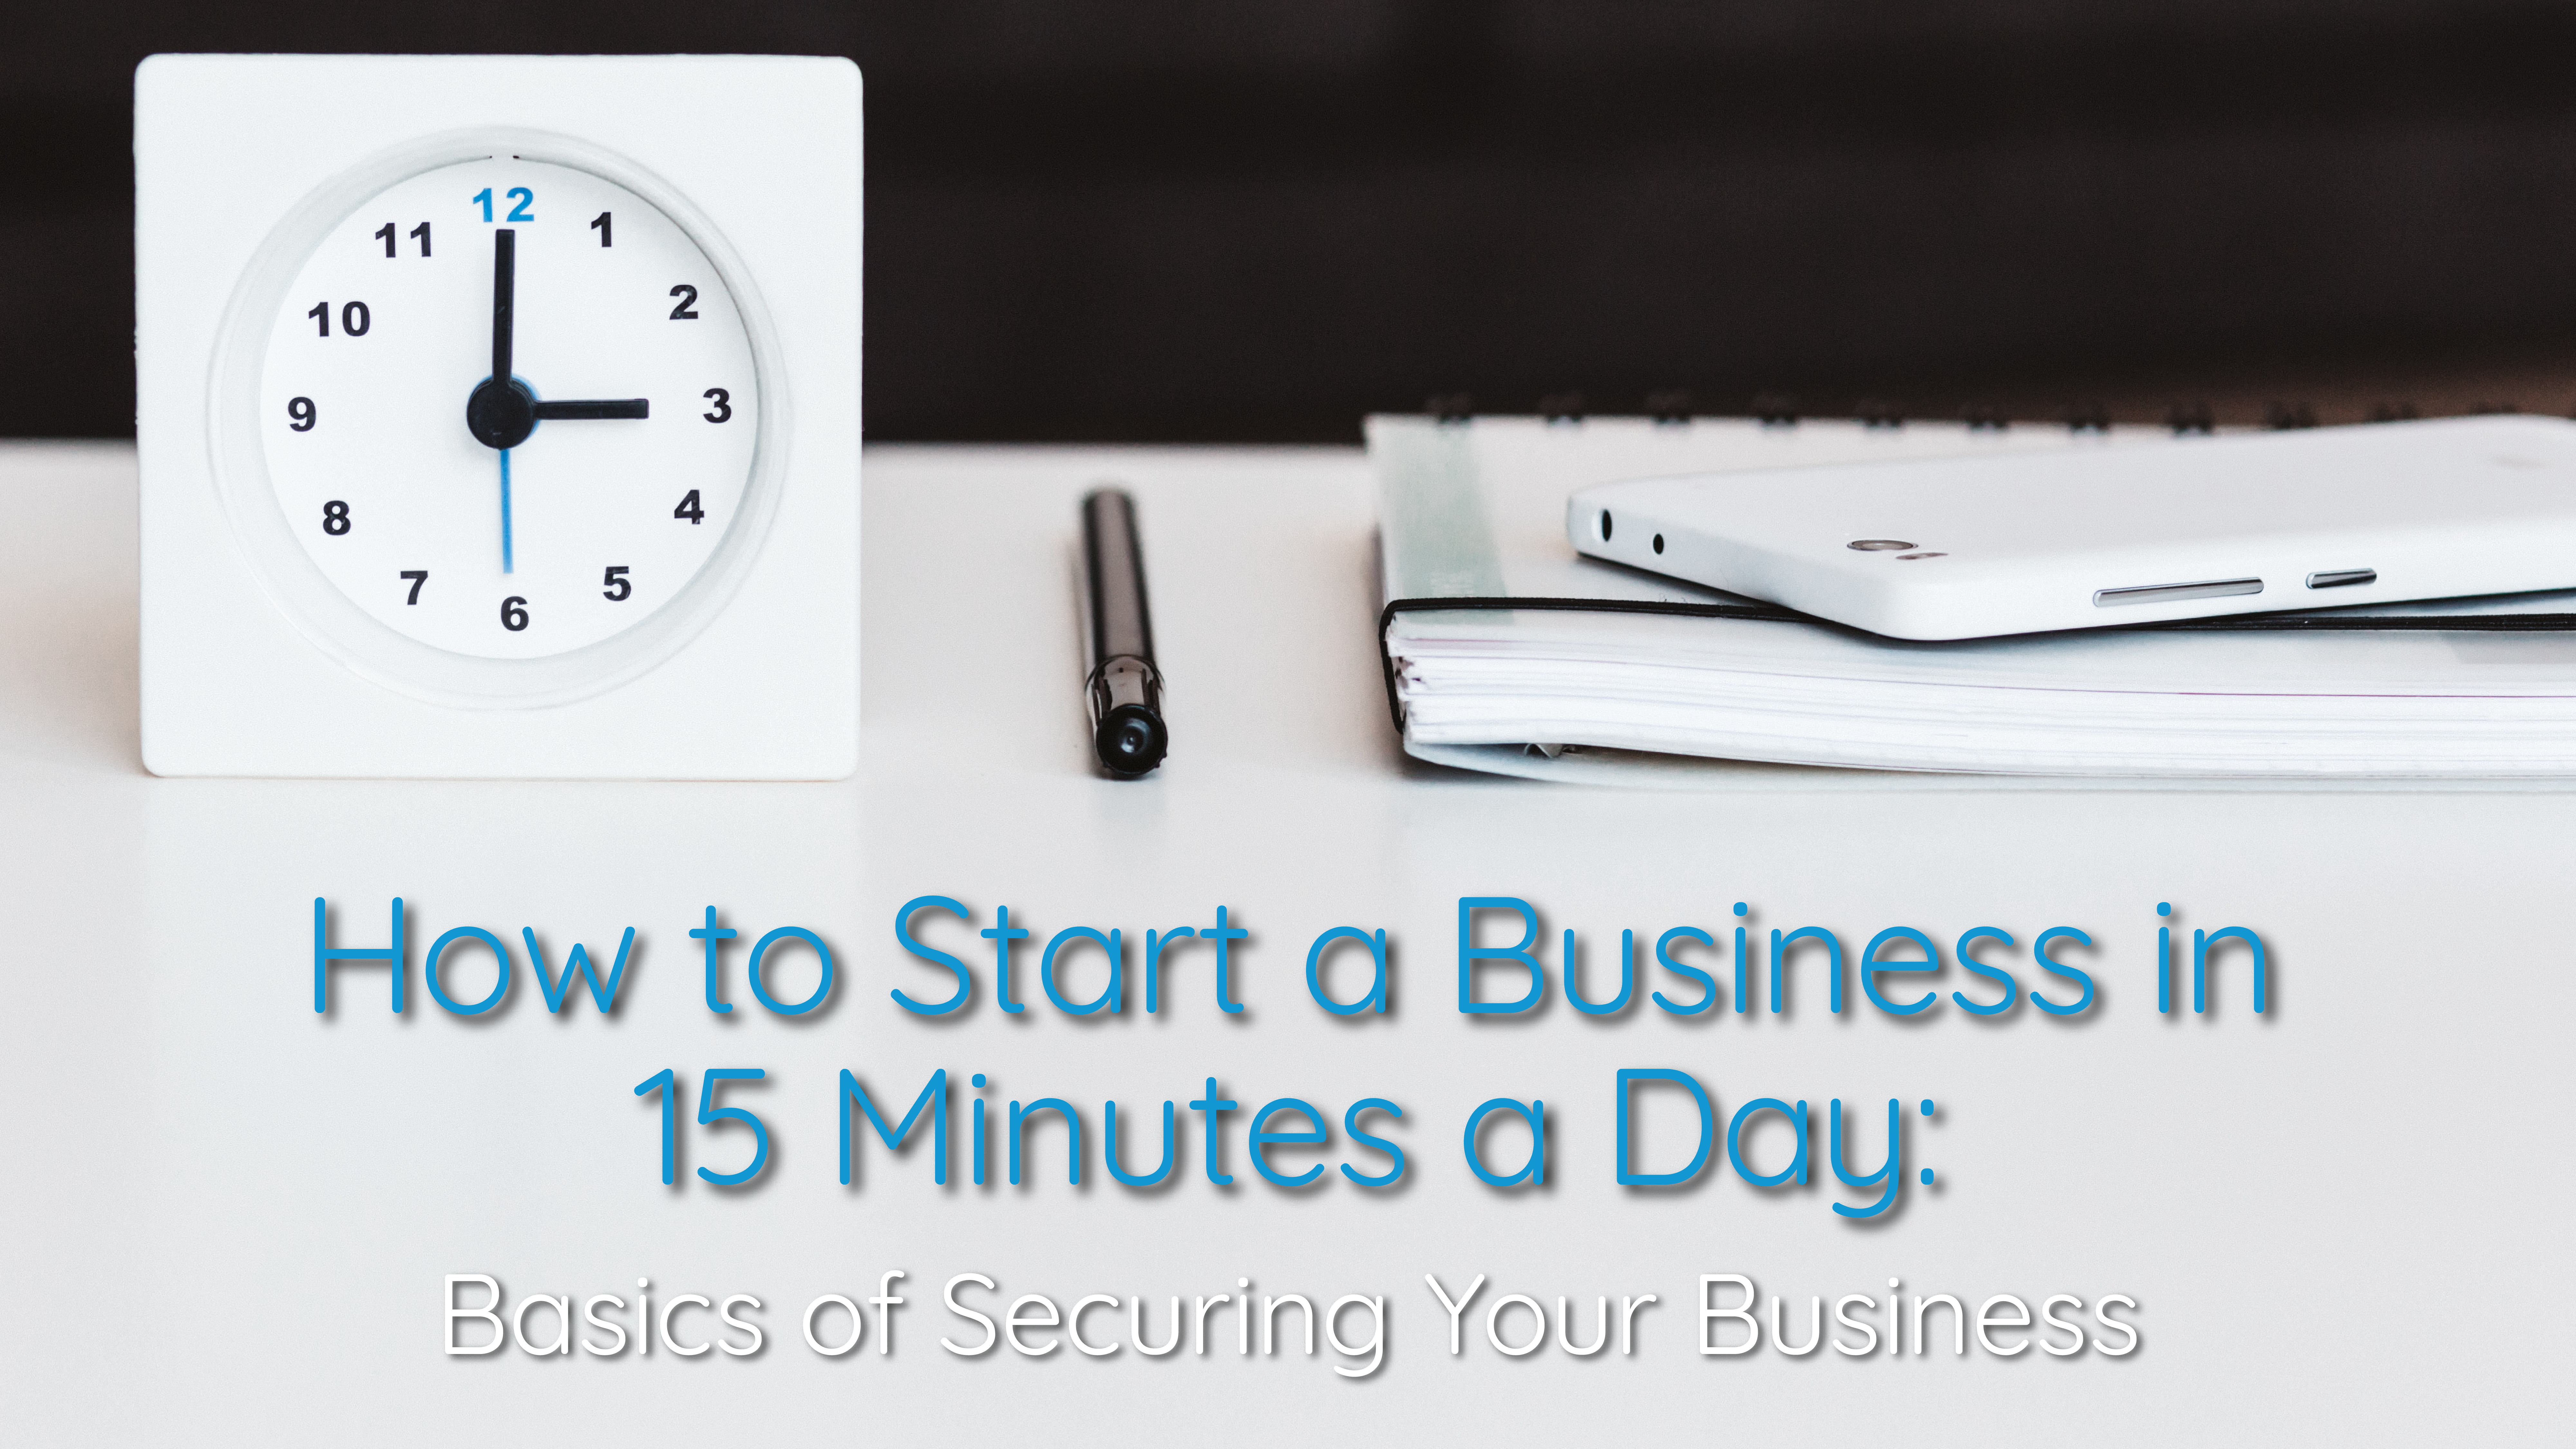 How To Start a Business in 15 Minutes a Day Part 4: Basics of Securing Your Business